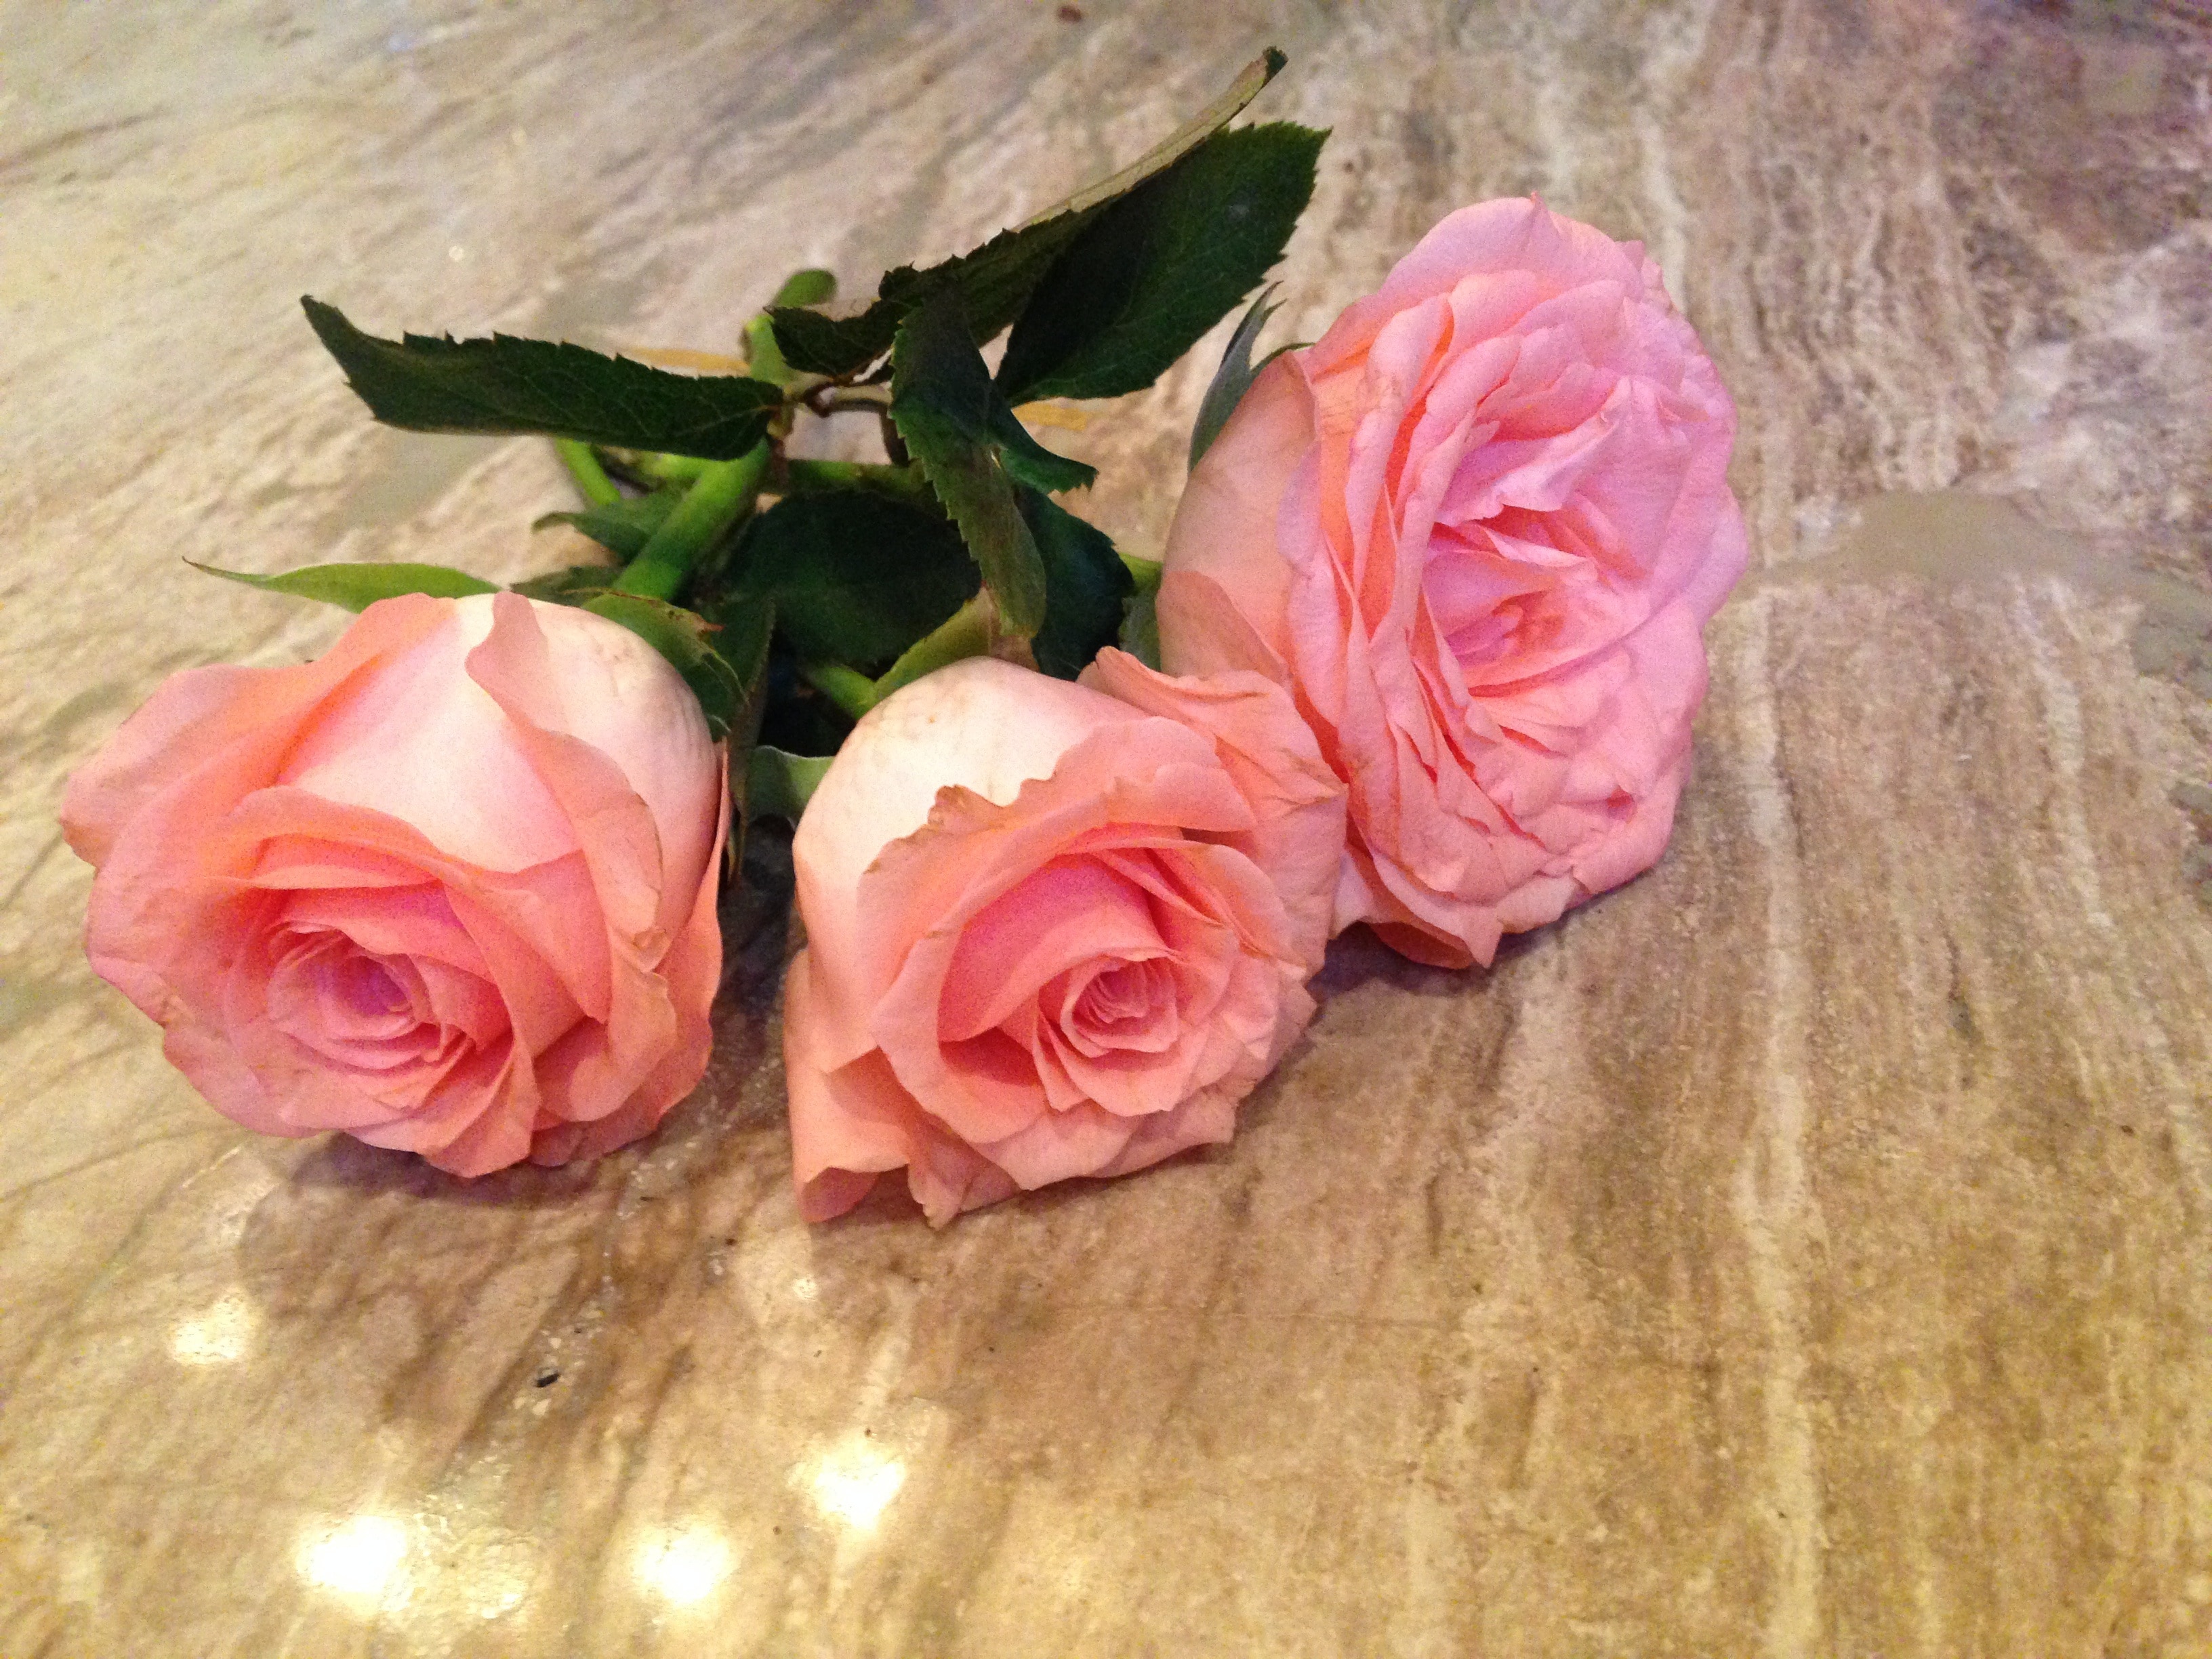 3 pink roses